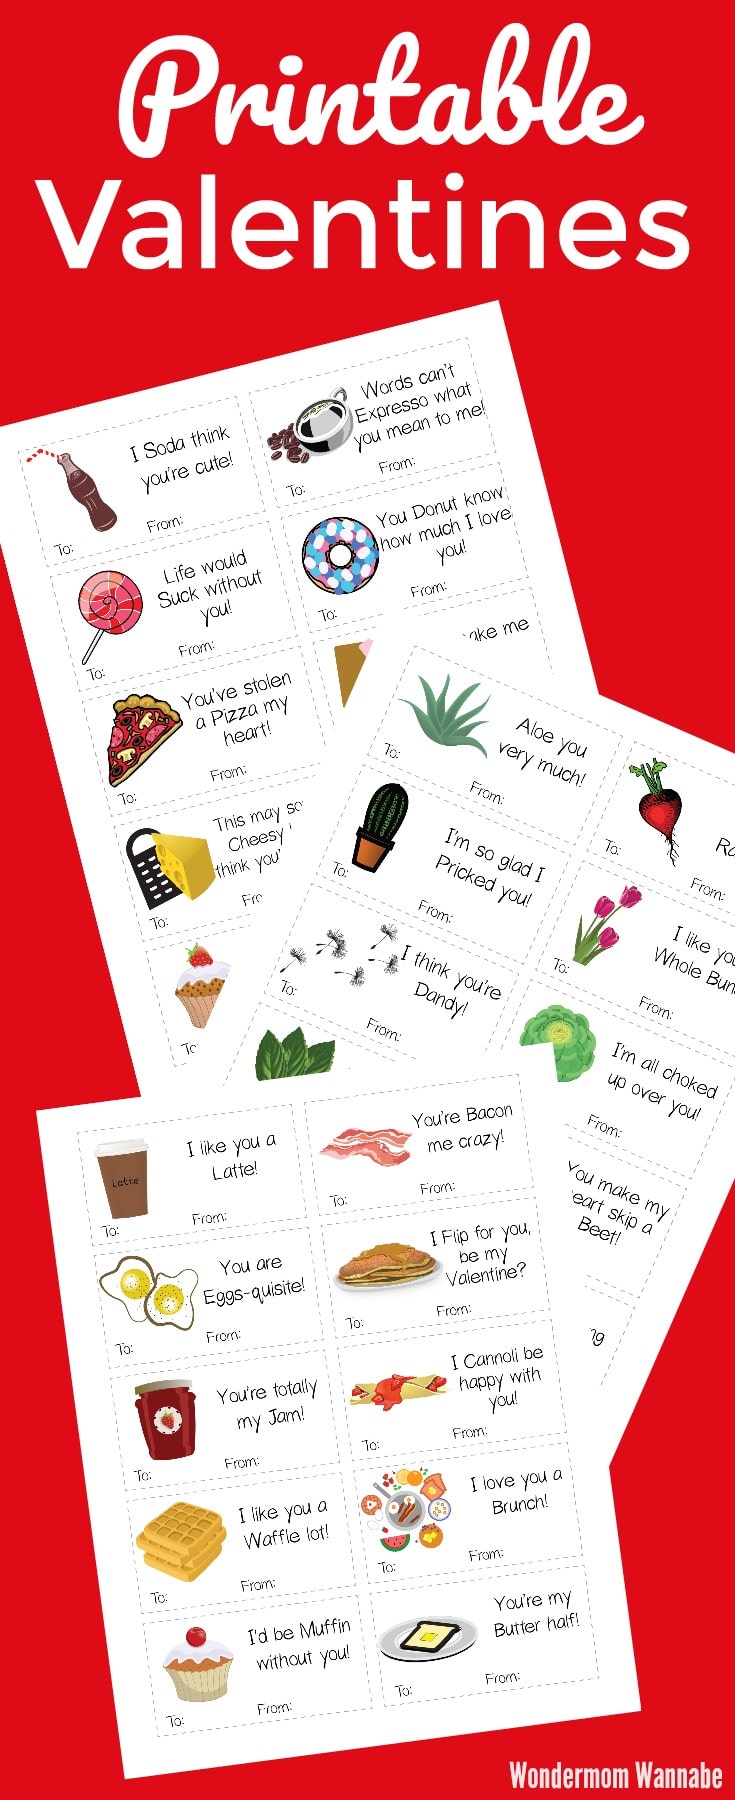 Three sets of very punny printable Valentines, plus clever ideas for making them extra memorable! #Valentines #punny #printables via @wondermomwannab